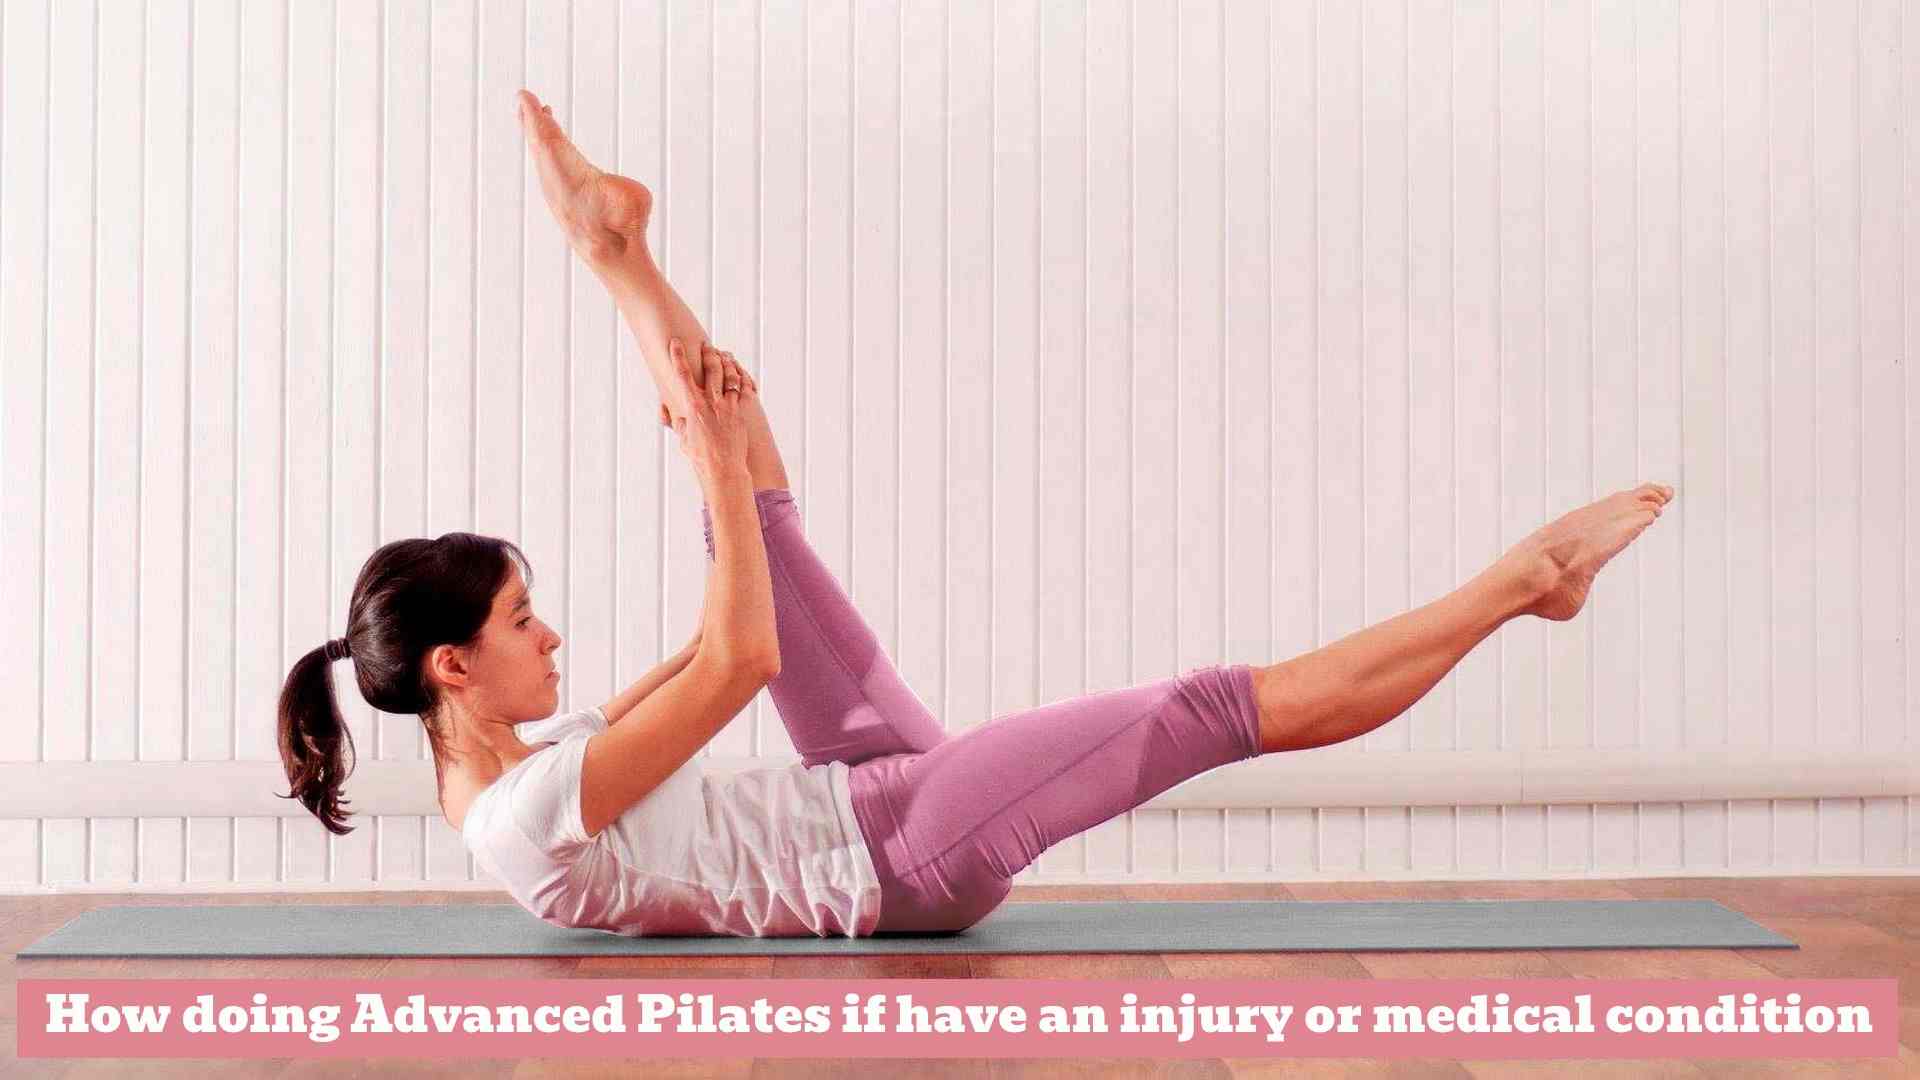 equipment is needed for Advanced Pilates